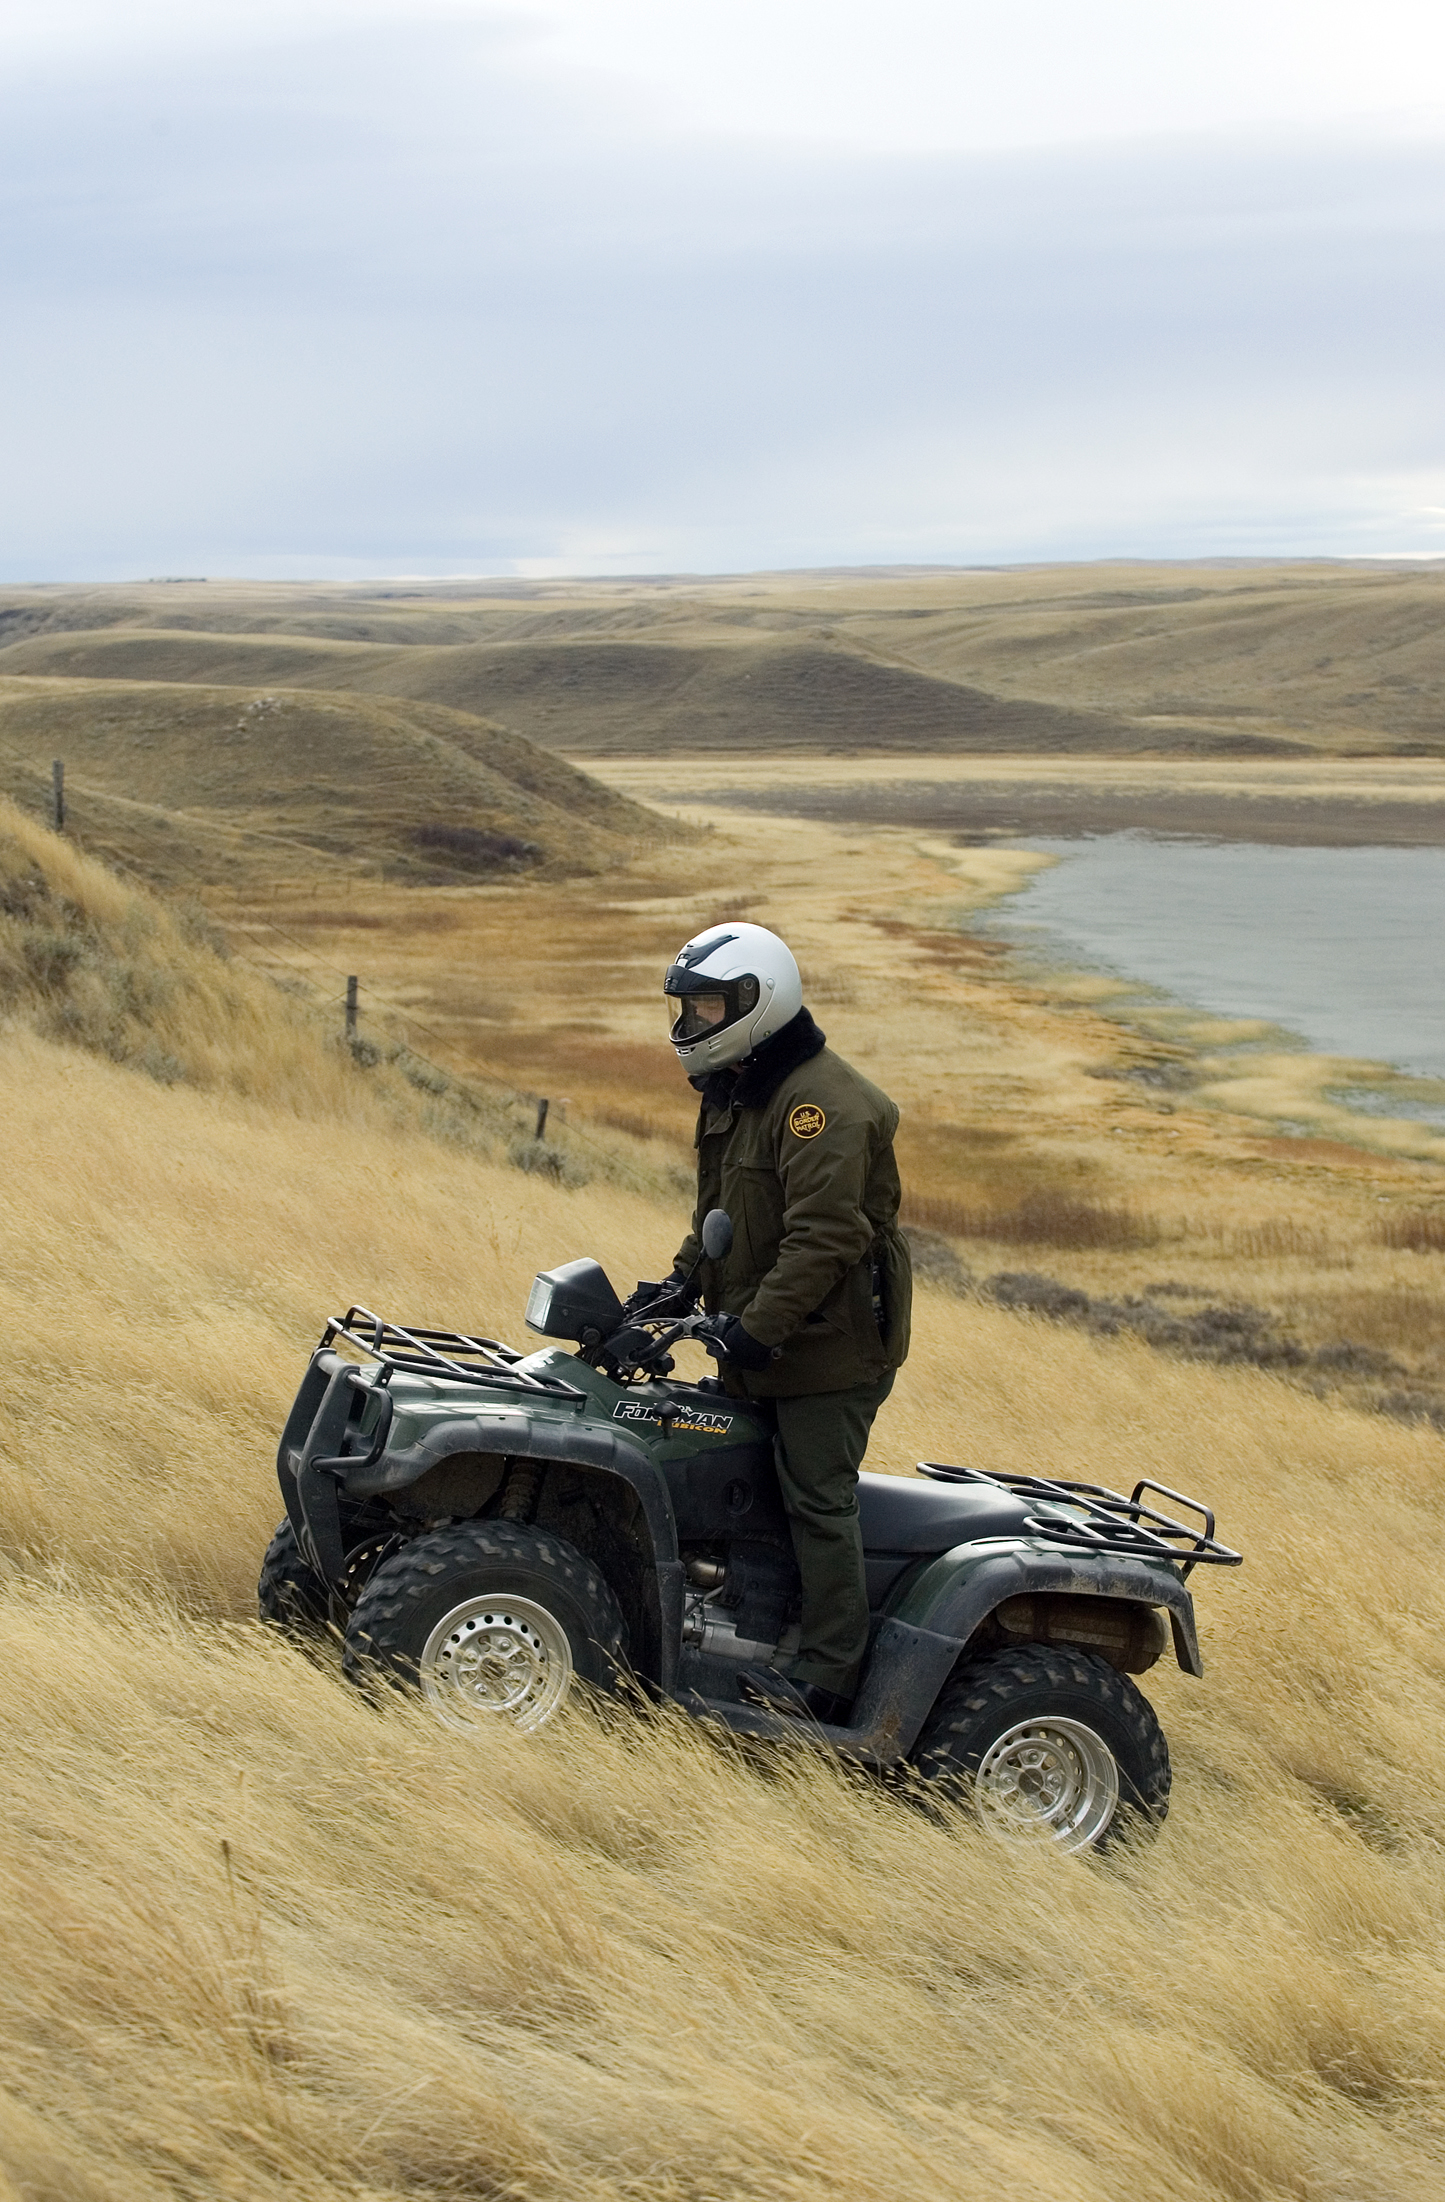 Border Patrol agent uses All Terrain Vehicle to conduct routine patrols near the US/Canadian border near Sweet Grass Montana.